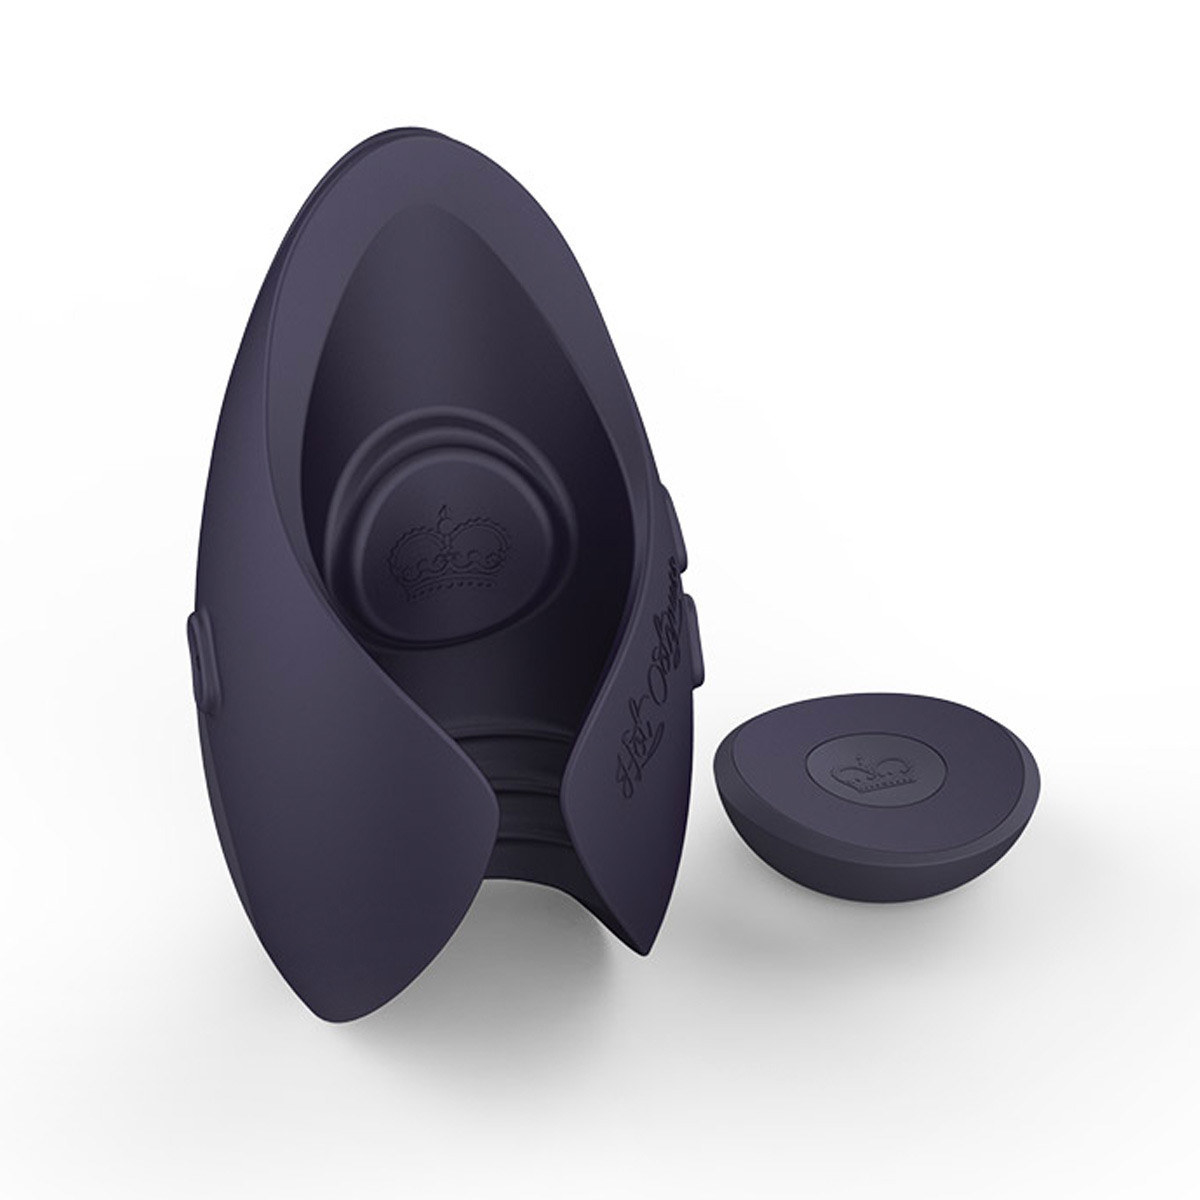 The Pulse III Duo penis stimulator and remote control